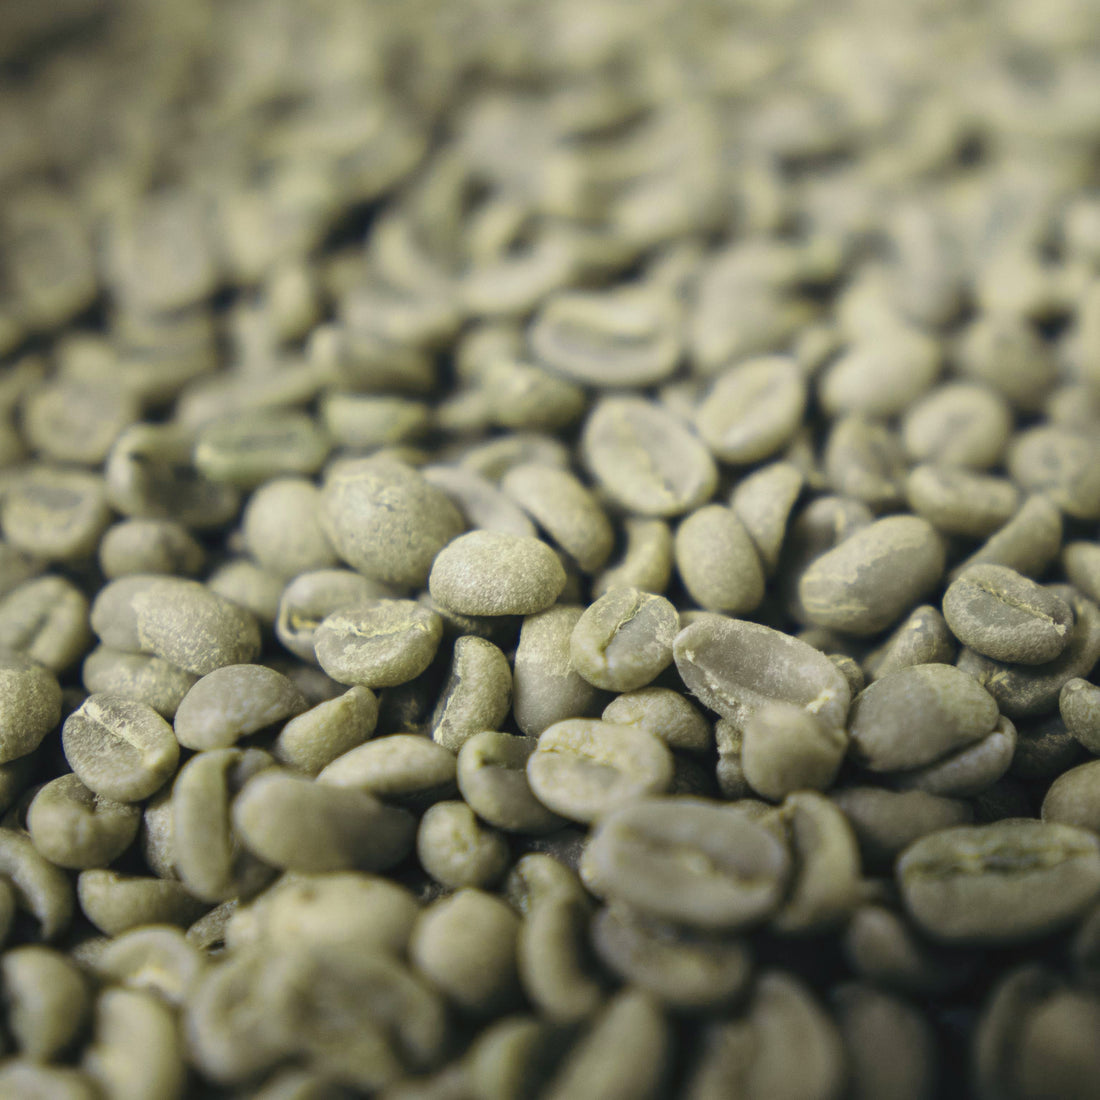 The Skinny on Green Coffee Beans